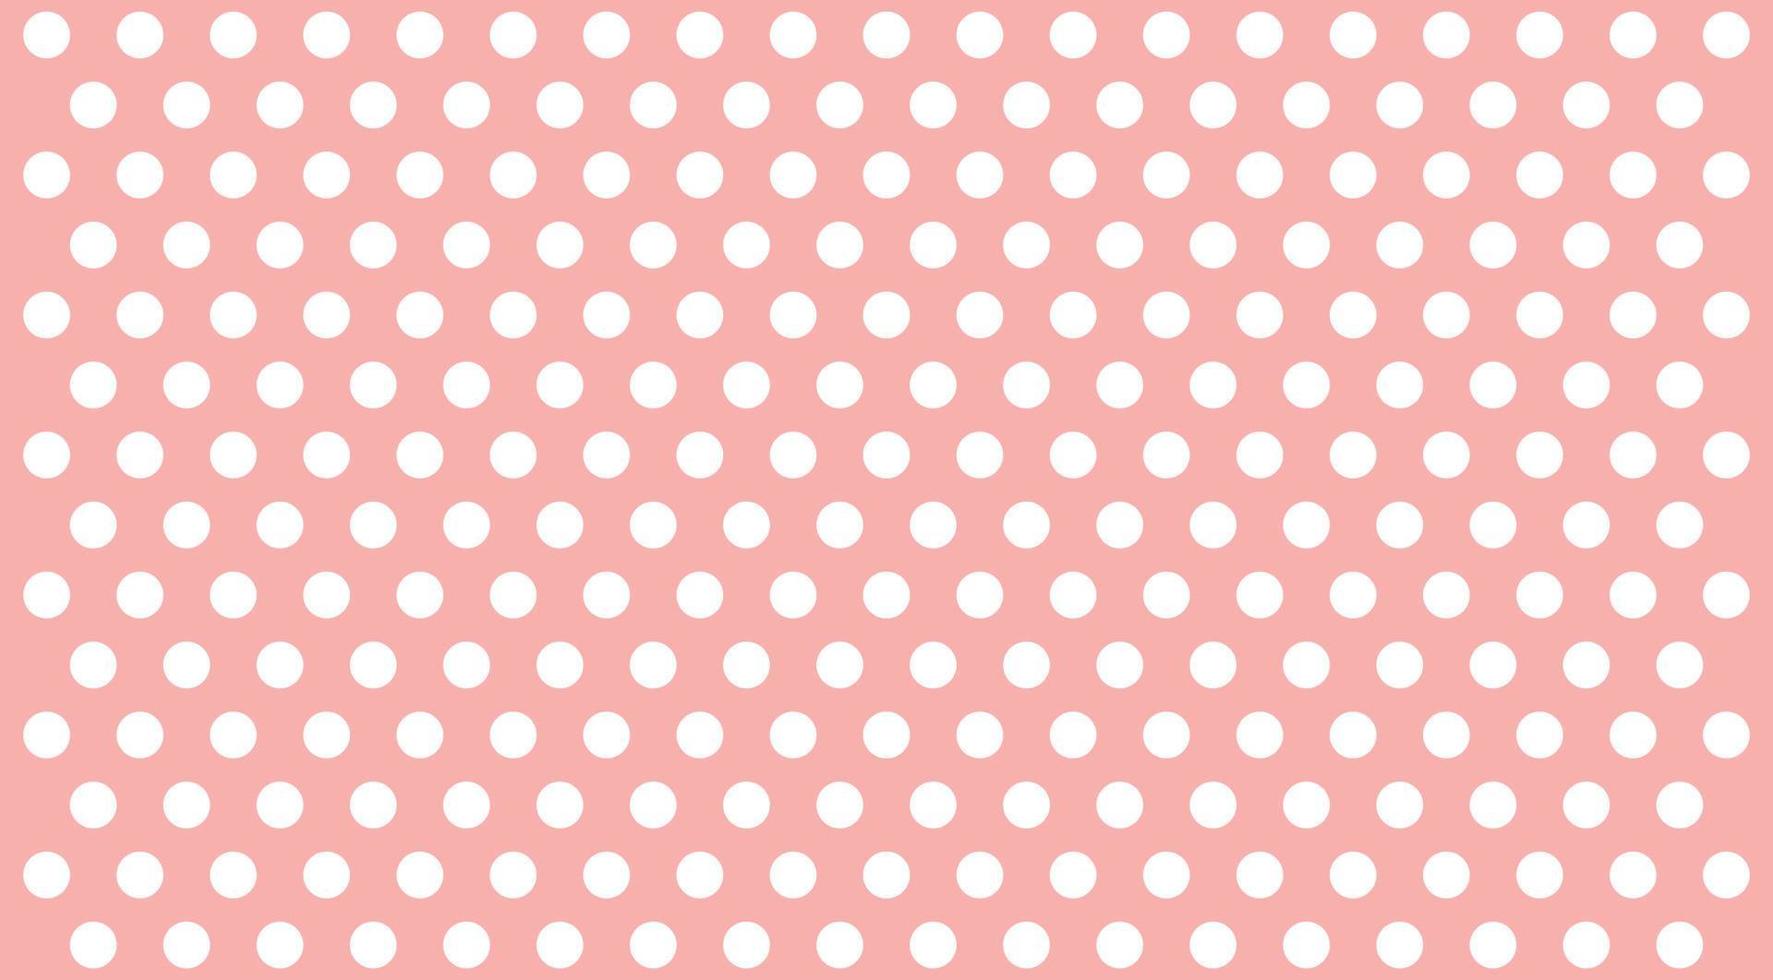 pretty cute sweet polka dots seamless pattern retro stylish vintage pink and white wide background concept for fashion printing vector